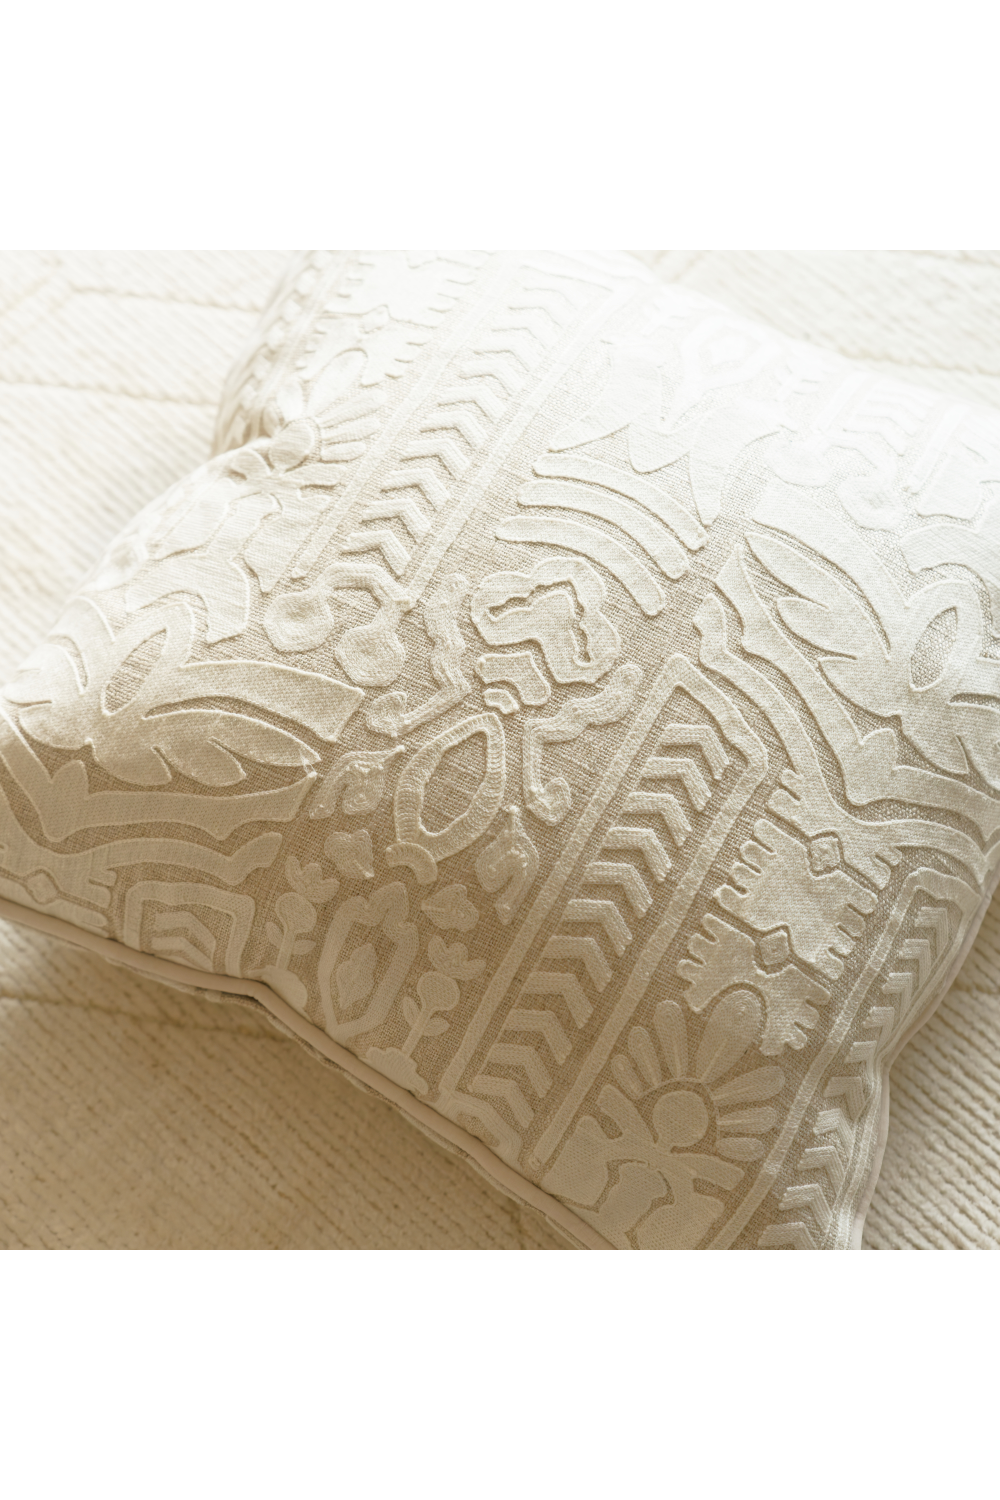 Linen Embroidered Cushion | Andrew Martin Totem | Oroa.com